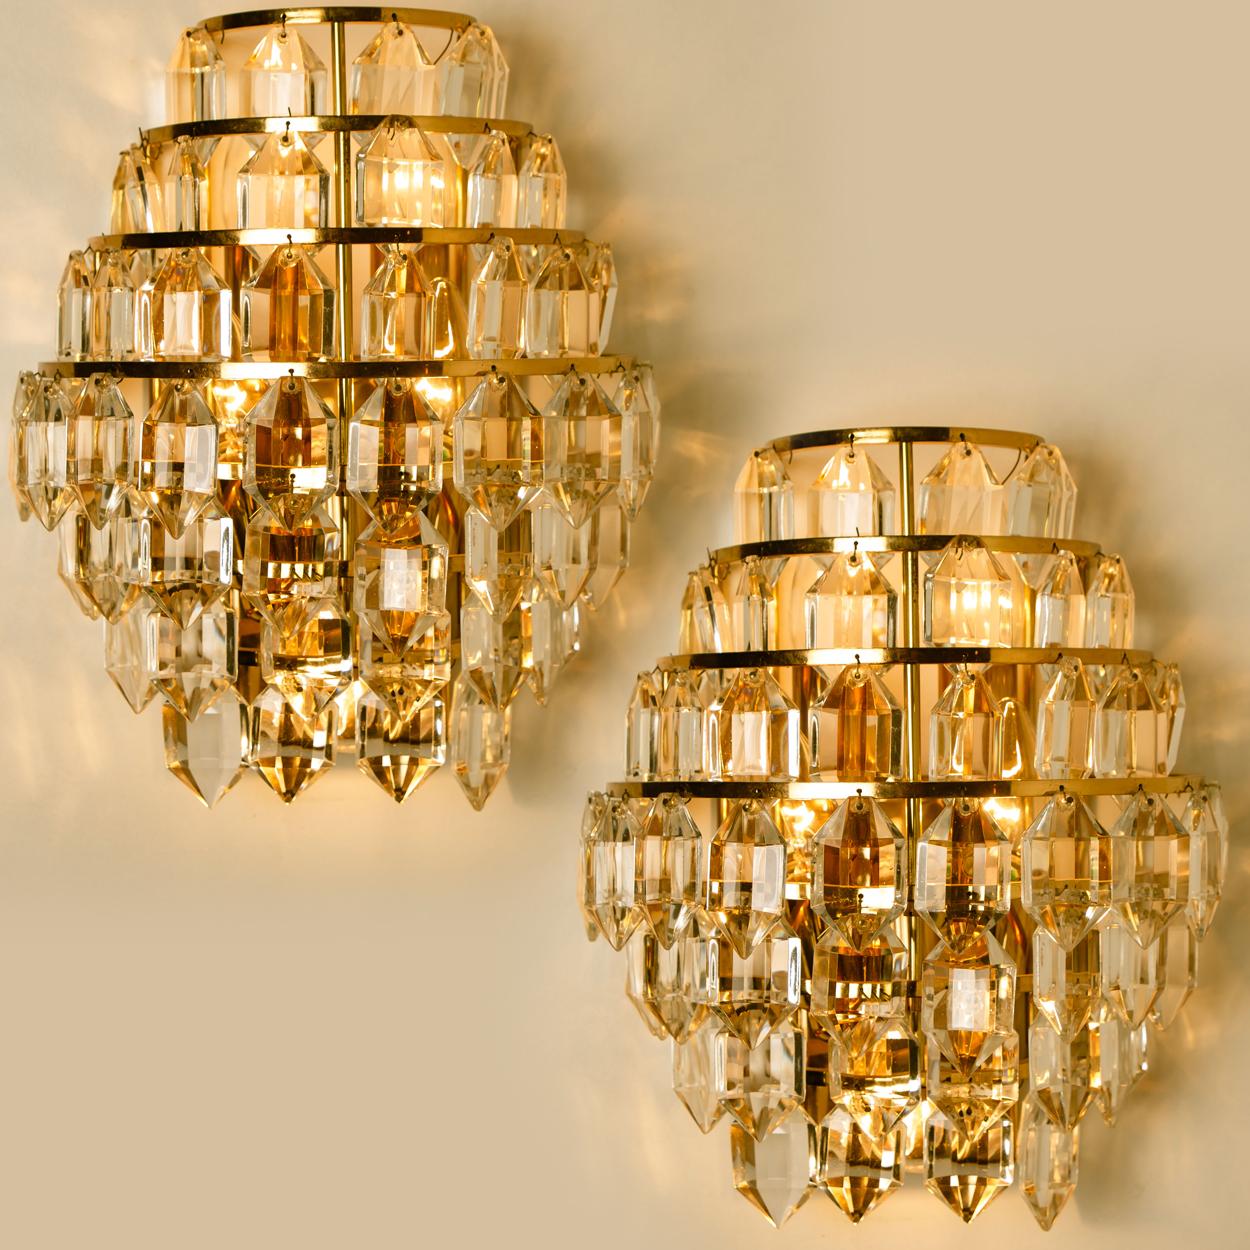 1 of the 4 wall lamps by Bakalowits, Austria, 1960s. A nice light effect through the crystal glass which spreads an elegant sparkling play of light in the room. Beautiful design and high-quality workmanship.

The lamp has a pull switch but can